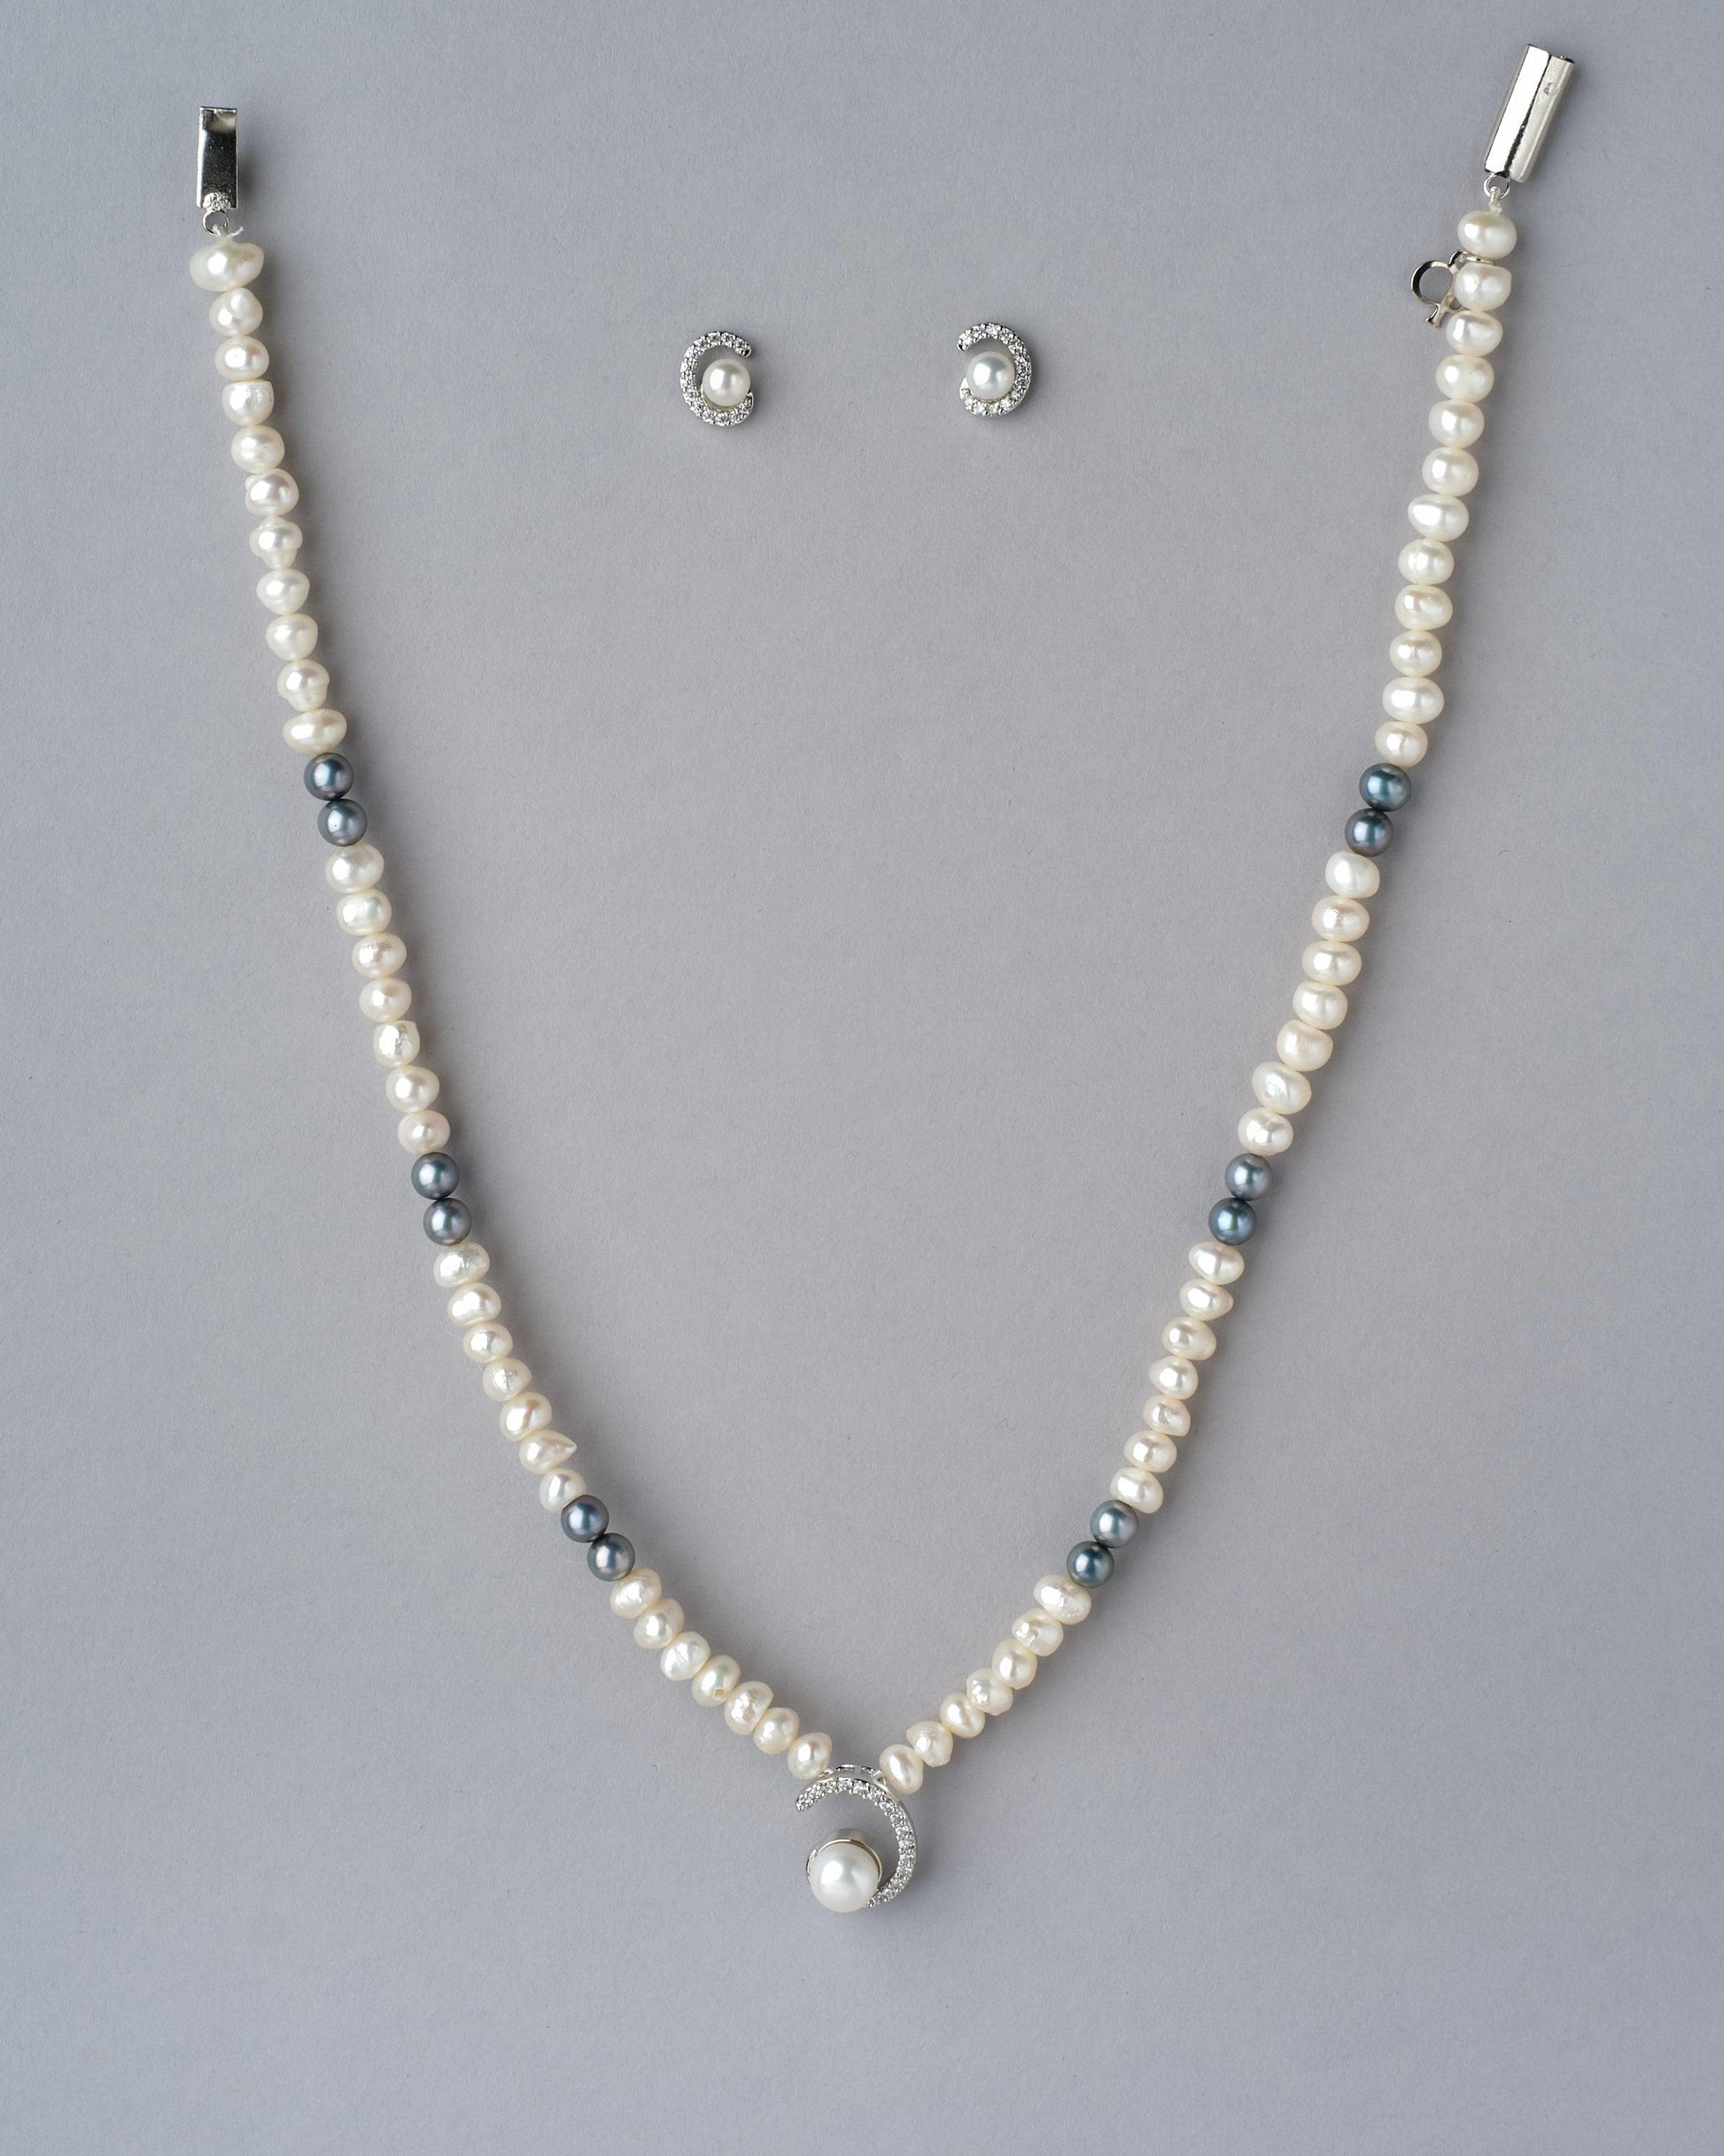 Exquisite Real Pearl Necklace Set - Chandrani Pearls